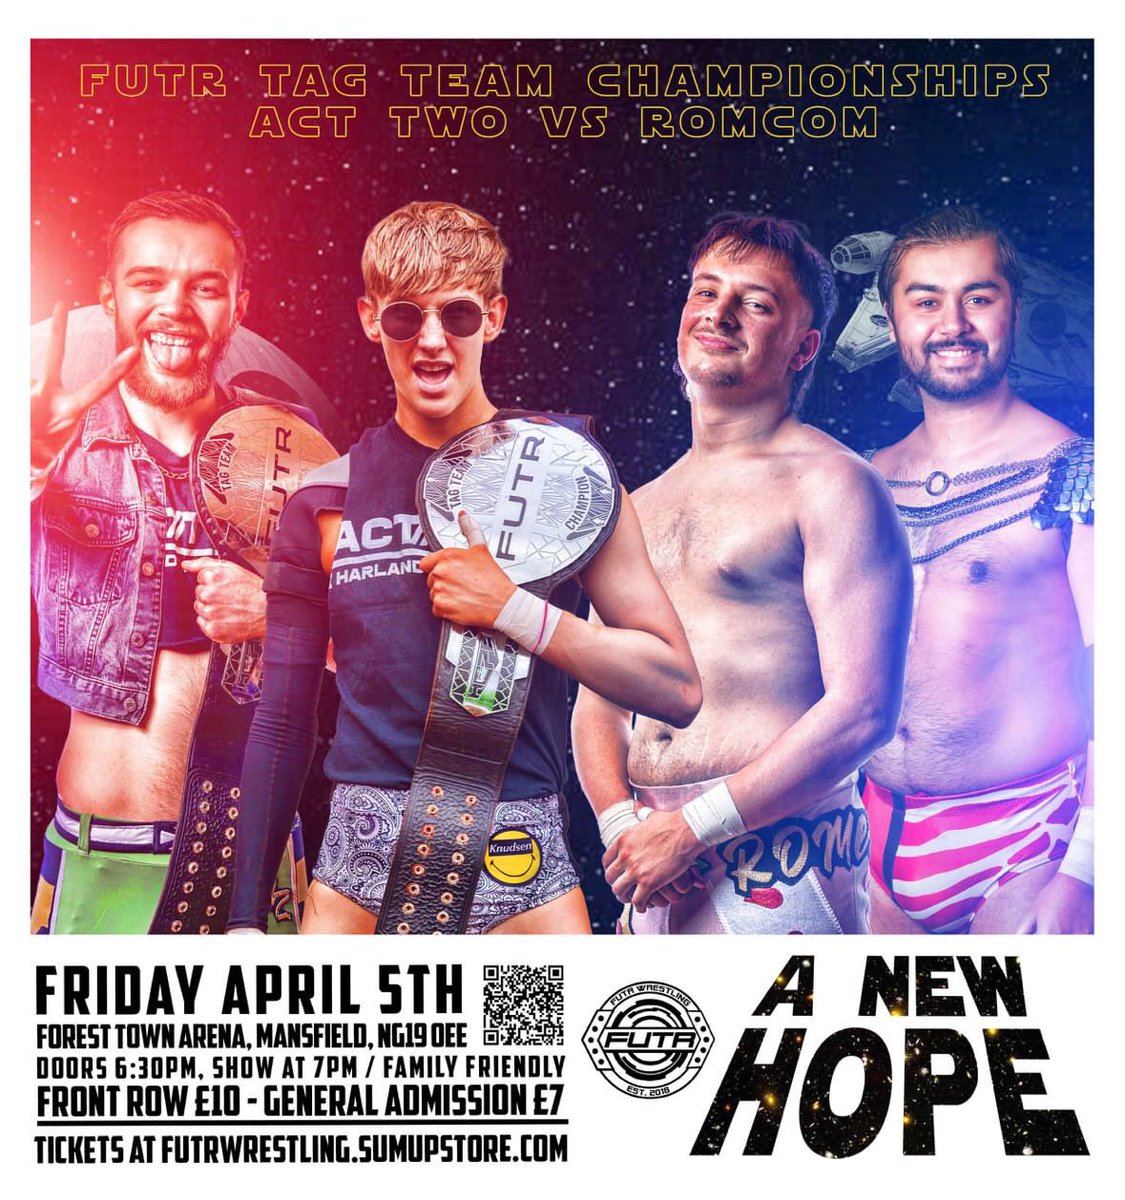 This is a polite reminder that this is happening April 5th at @FutrWrestling.

I am so incredibly excited to have this little battle. We promise to absolutely blow the roof off the gaff. Pinky promise. 

Buy tickets here: futrwrestling.sumupstore.com/category/mansf…